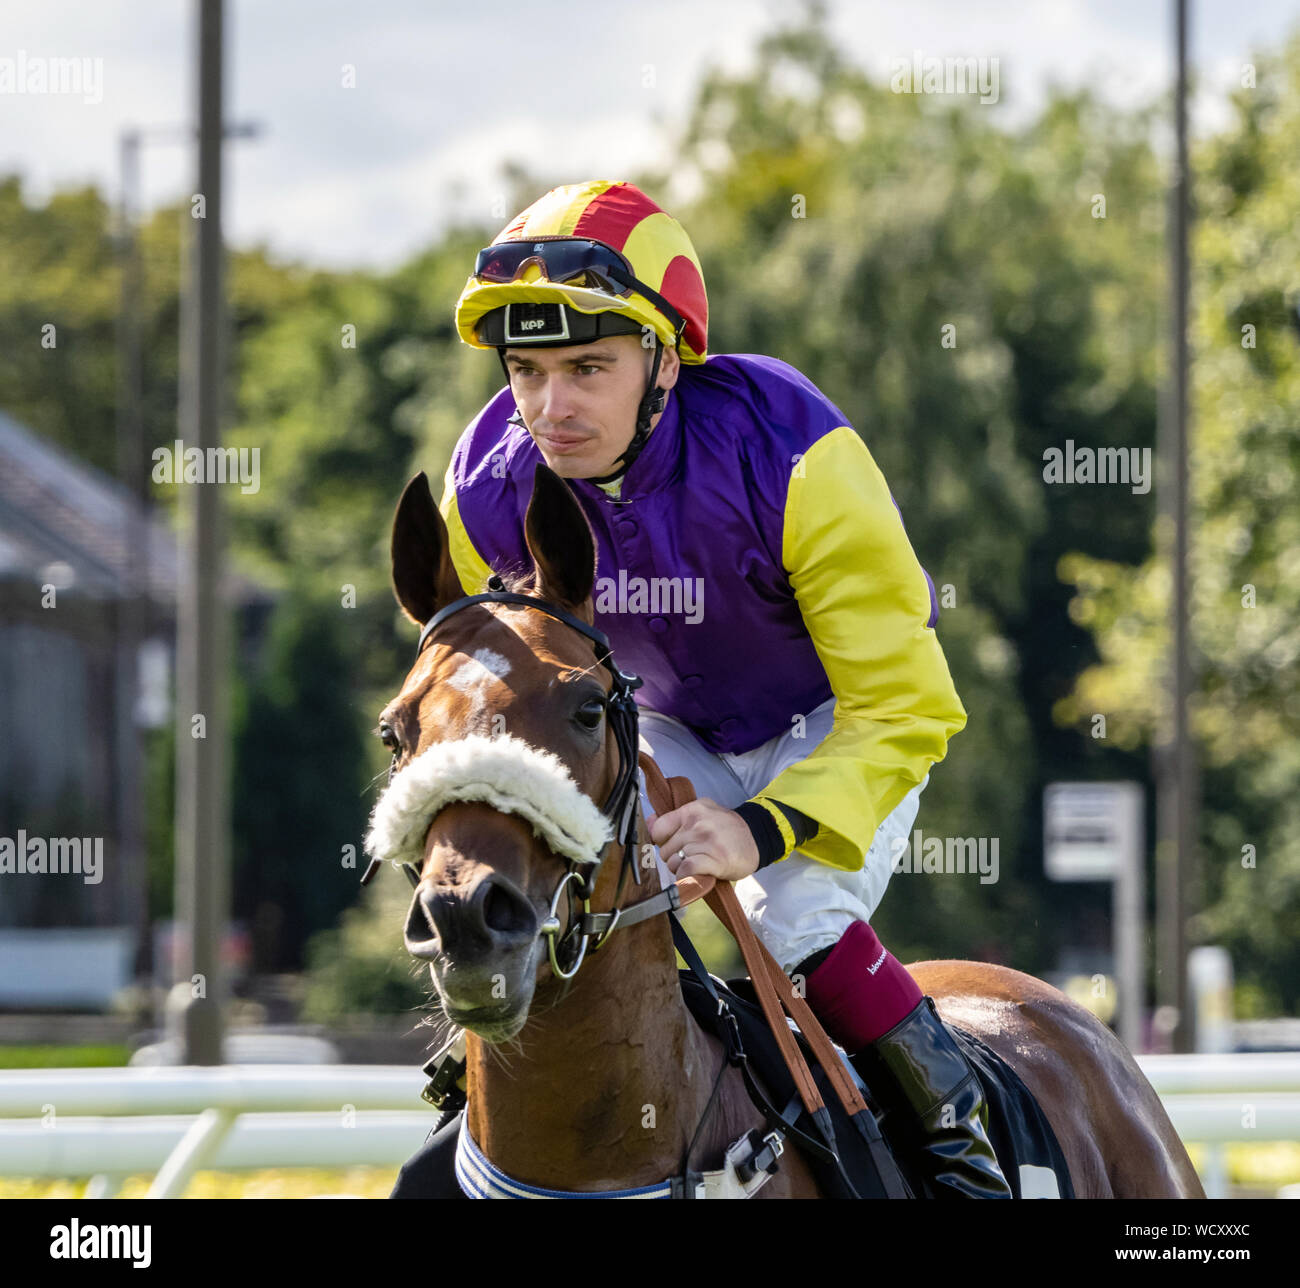 Jockey Andrew Mullen on Laoise before the start of the 'Catherine And Charlotte Roache Handicap', Musselburgh Racecourse, 28th August 2019 Stock Photo